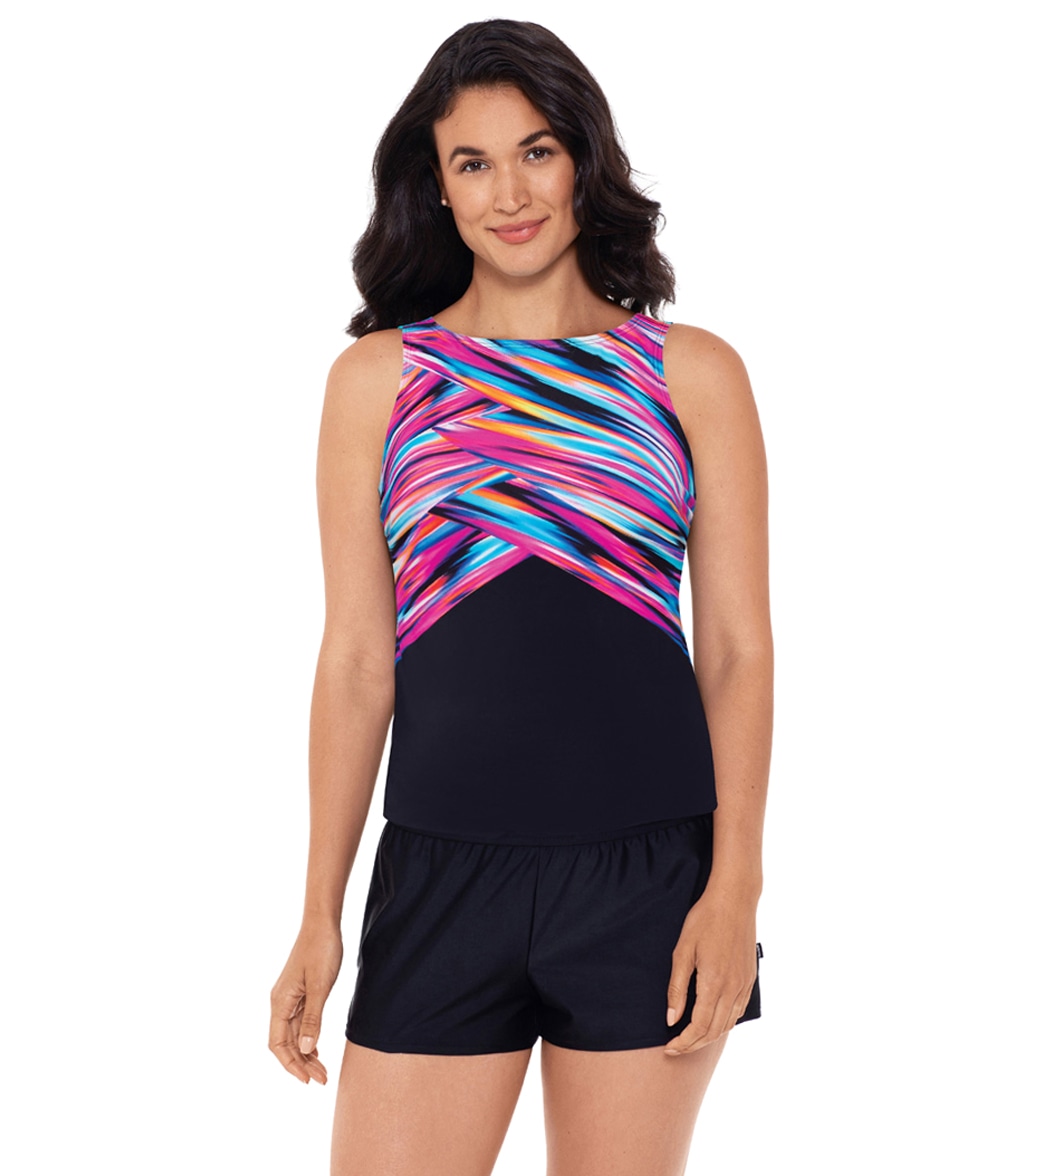 Reebok Women's Wrapped in Perfection High Neck Chlorine Resistant ...